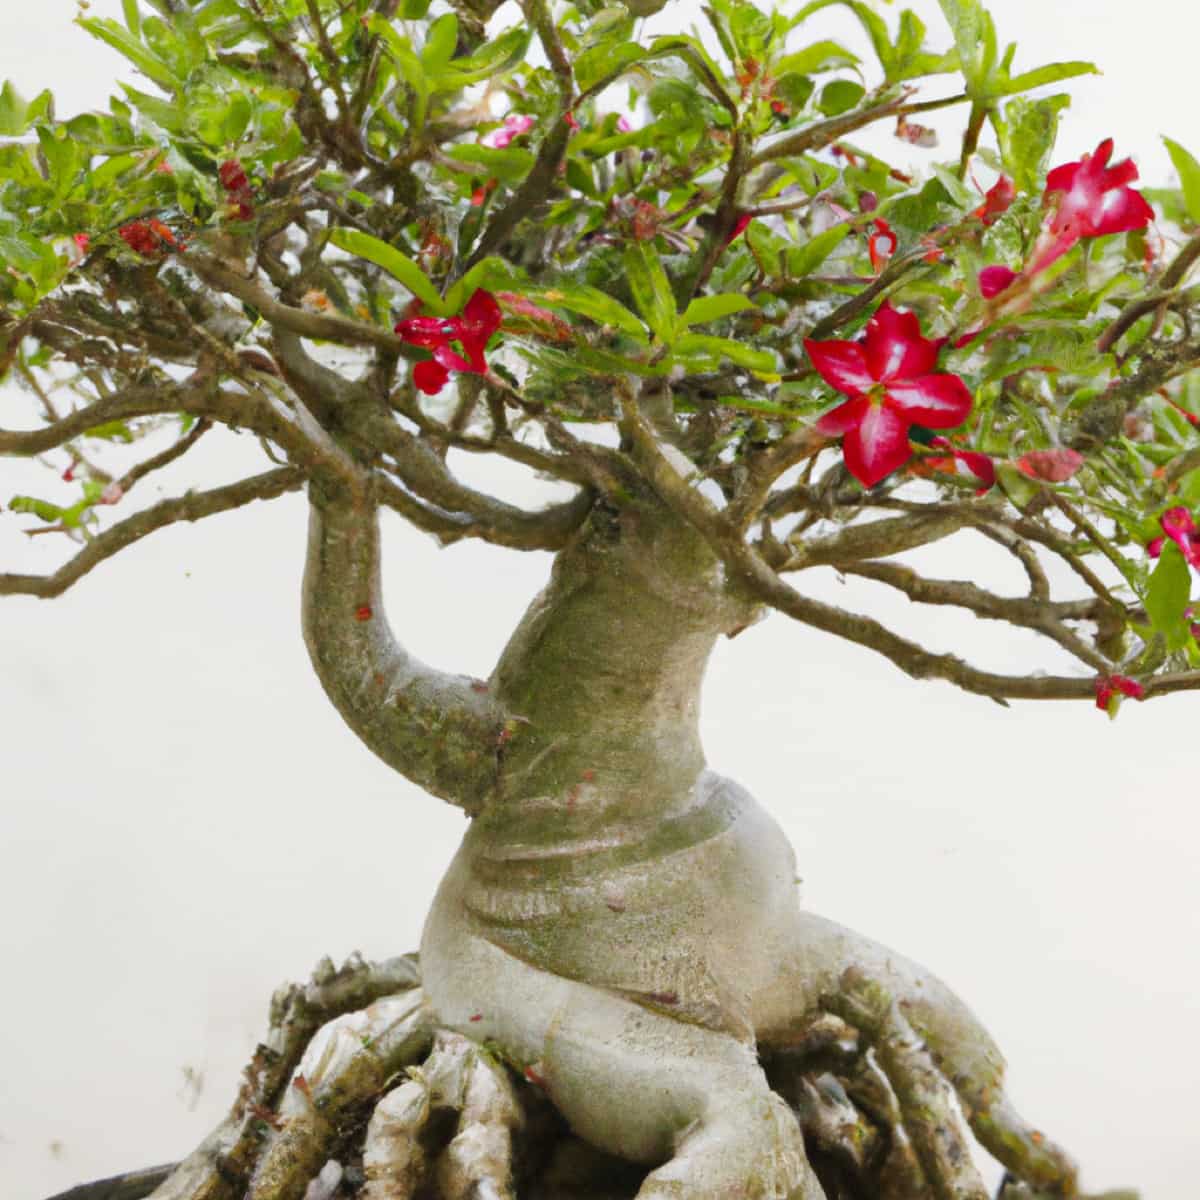 How to Grow and Care for Desert Rose Bonsai